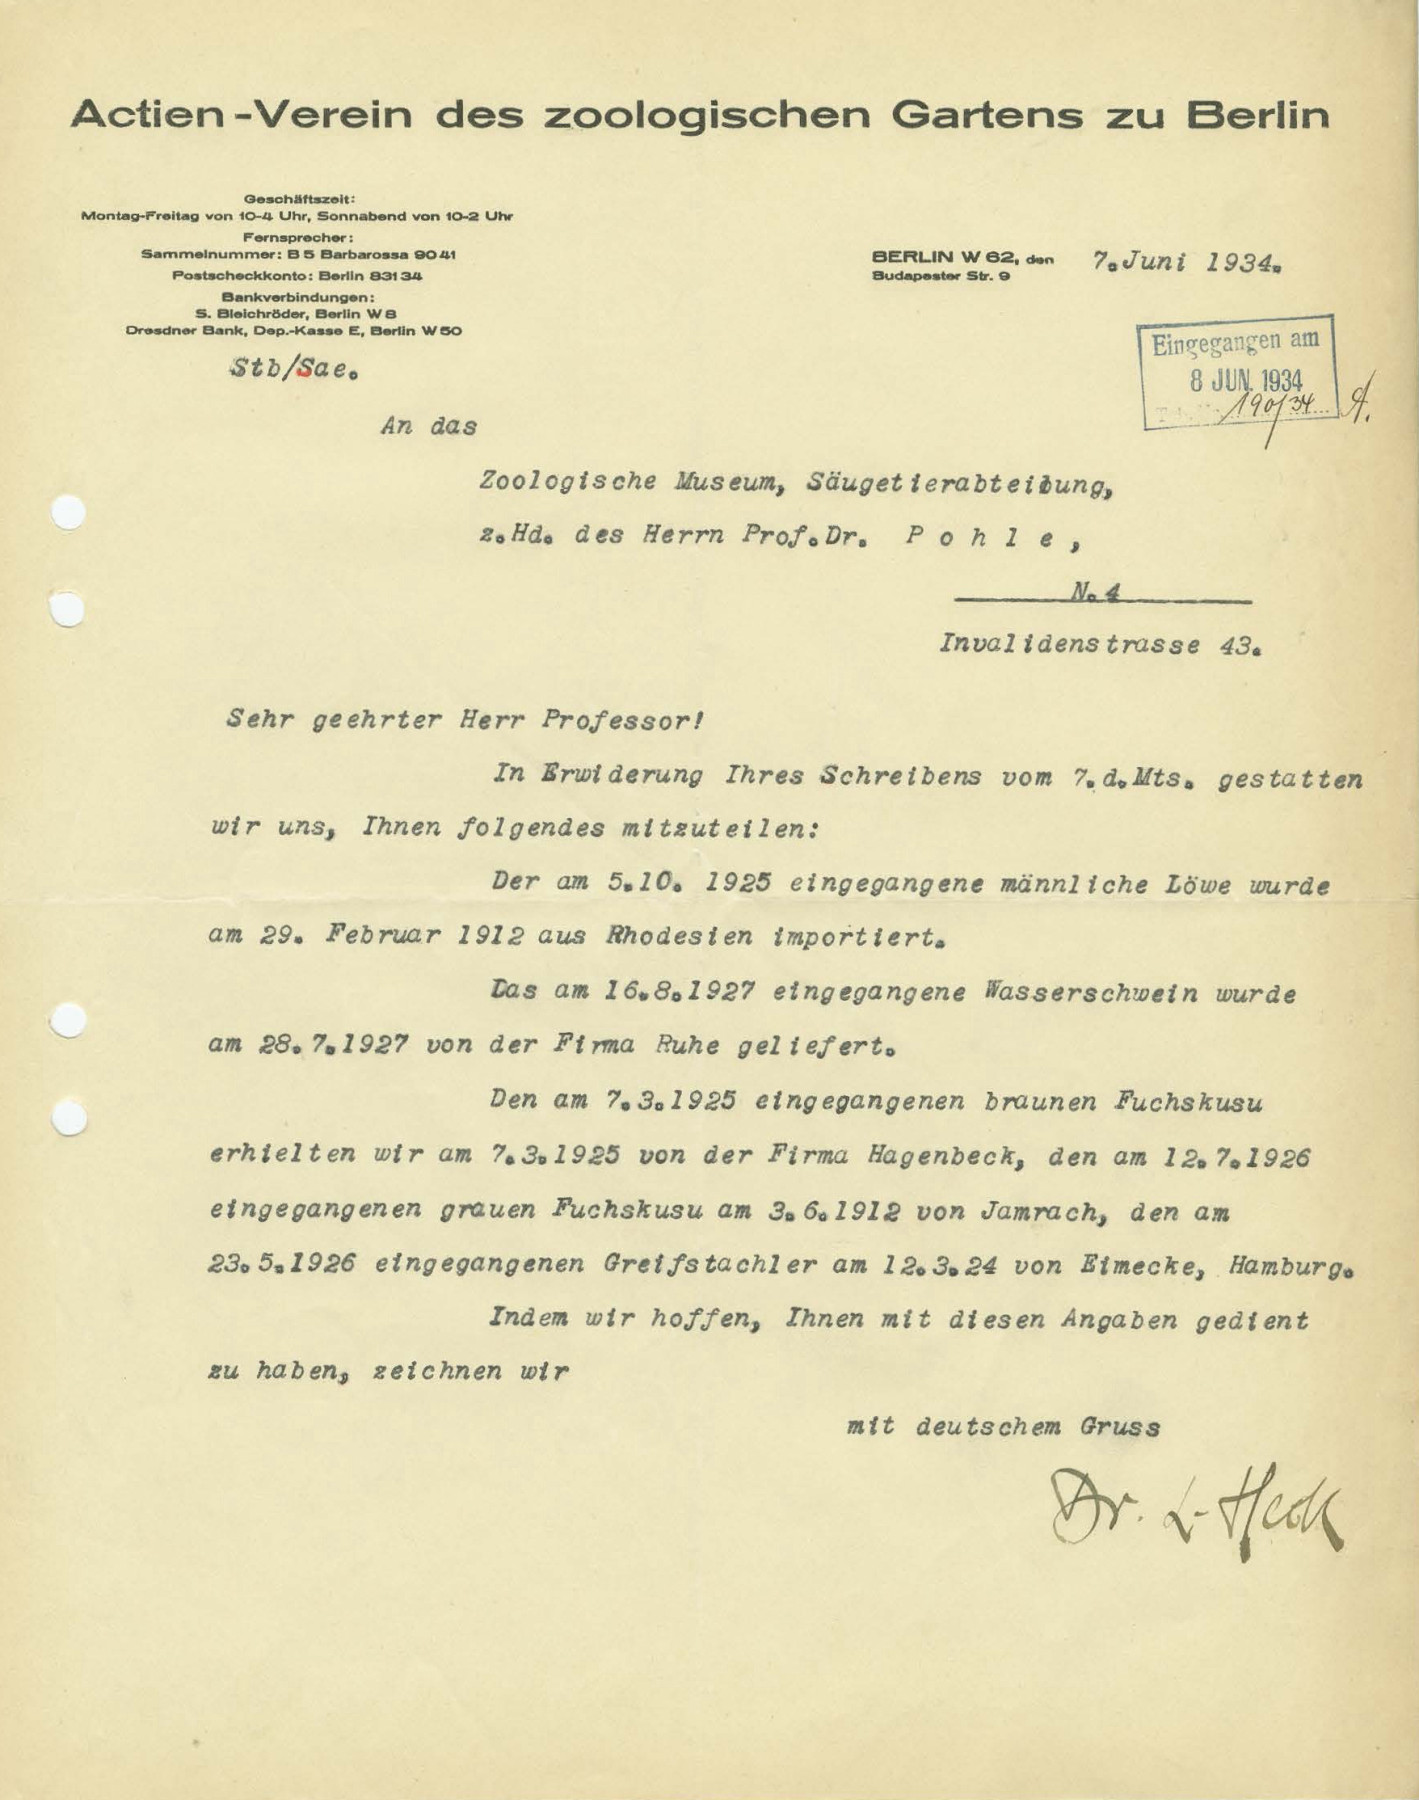 Typewritten letter: (...) The male lion received on 5.10.1925 was imported from Rhodesia on 29 February 1912. The capybara received on 16 August 1927 was delivered by the Ruhe company on 28 July 1927. We received the brown brushtail possum, which had arrived on 7 March 1925, on the same day from the Hagenbeck company, the grey brushtail possum, which had arrived on 12 July 1926, was received on 3 June 1912 from Jamrach, the prehensile-tailed porcupine, which had arrived on 23 May 1926, was received from Eimecke in Hamburg on 12 March 1924. (...)